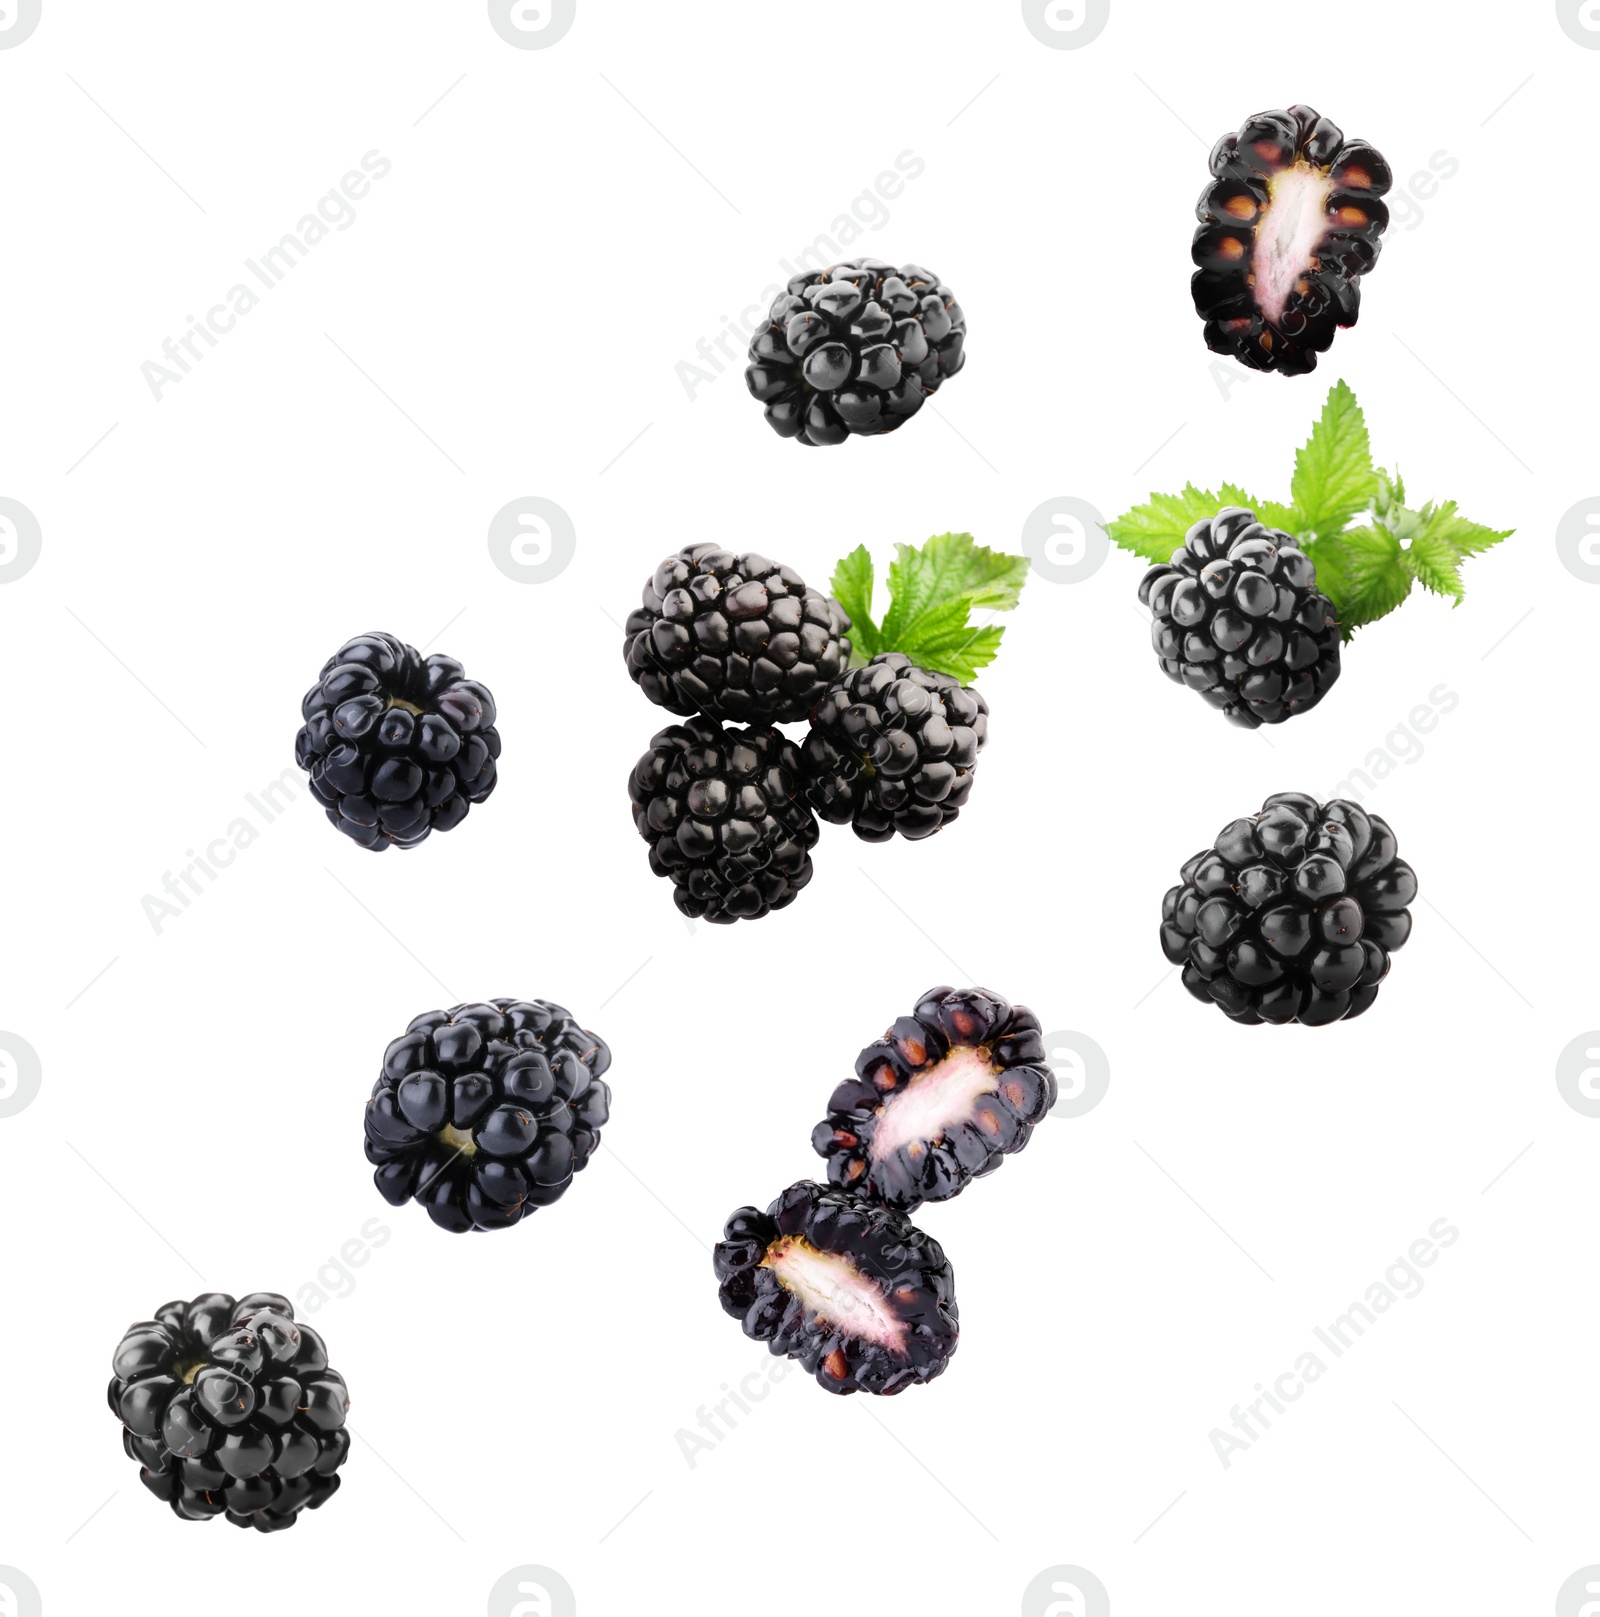 Image of Delicious ripe blackberries flying on white background